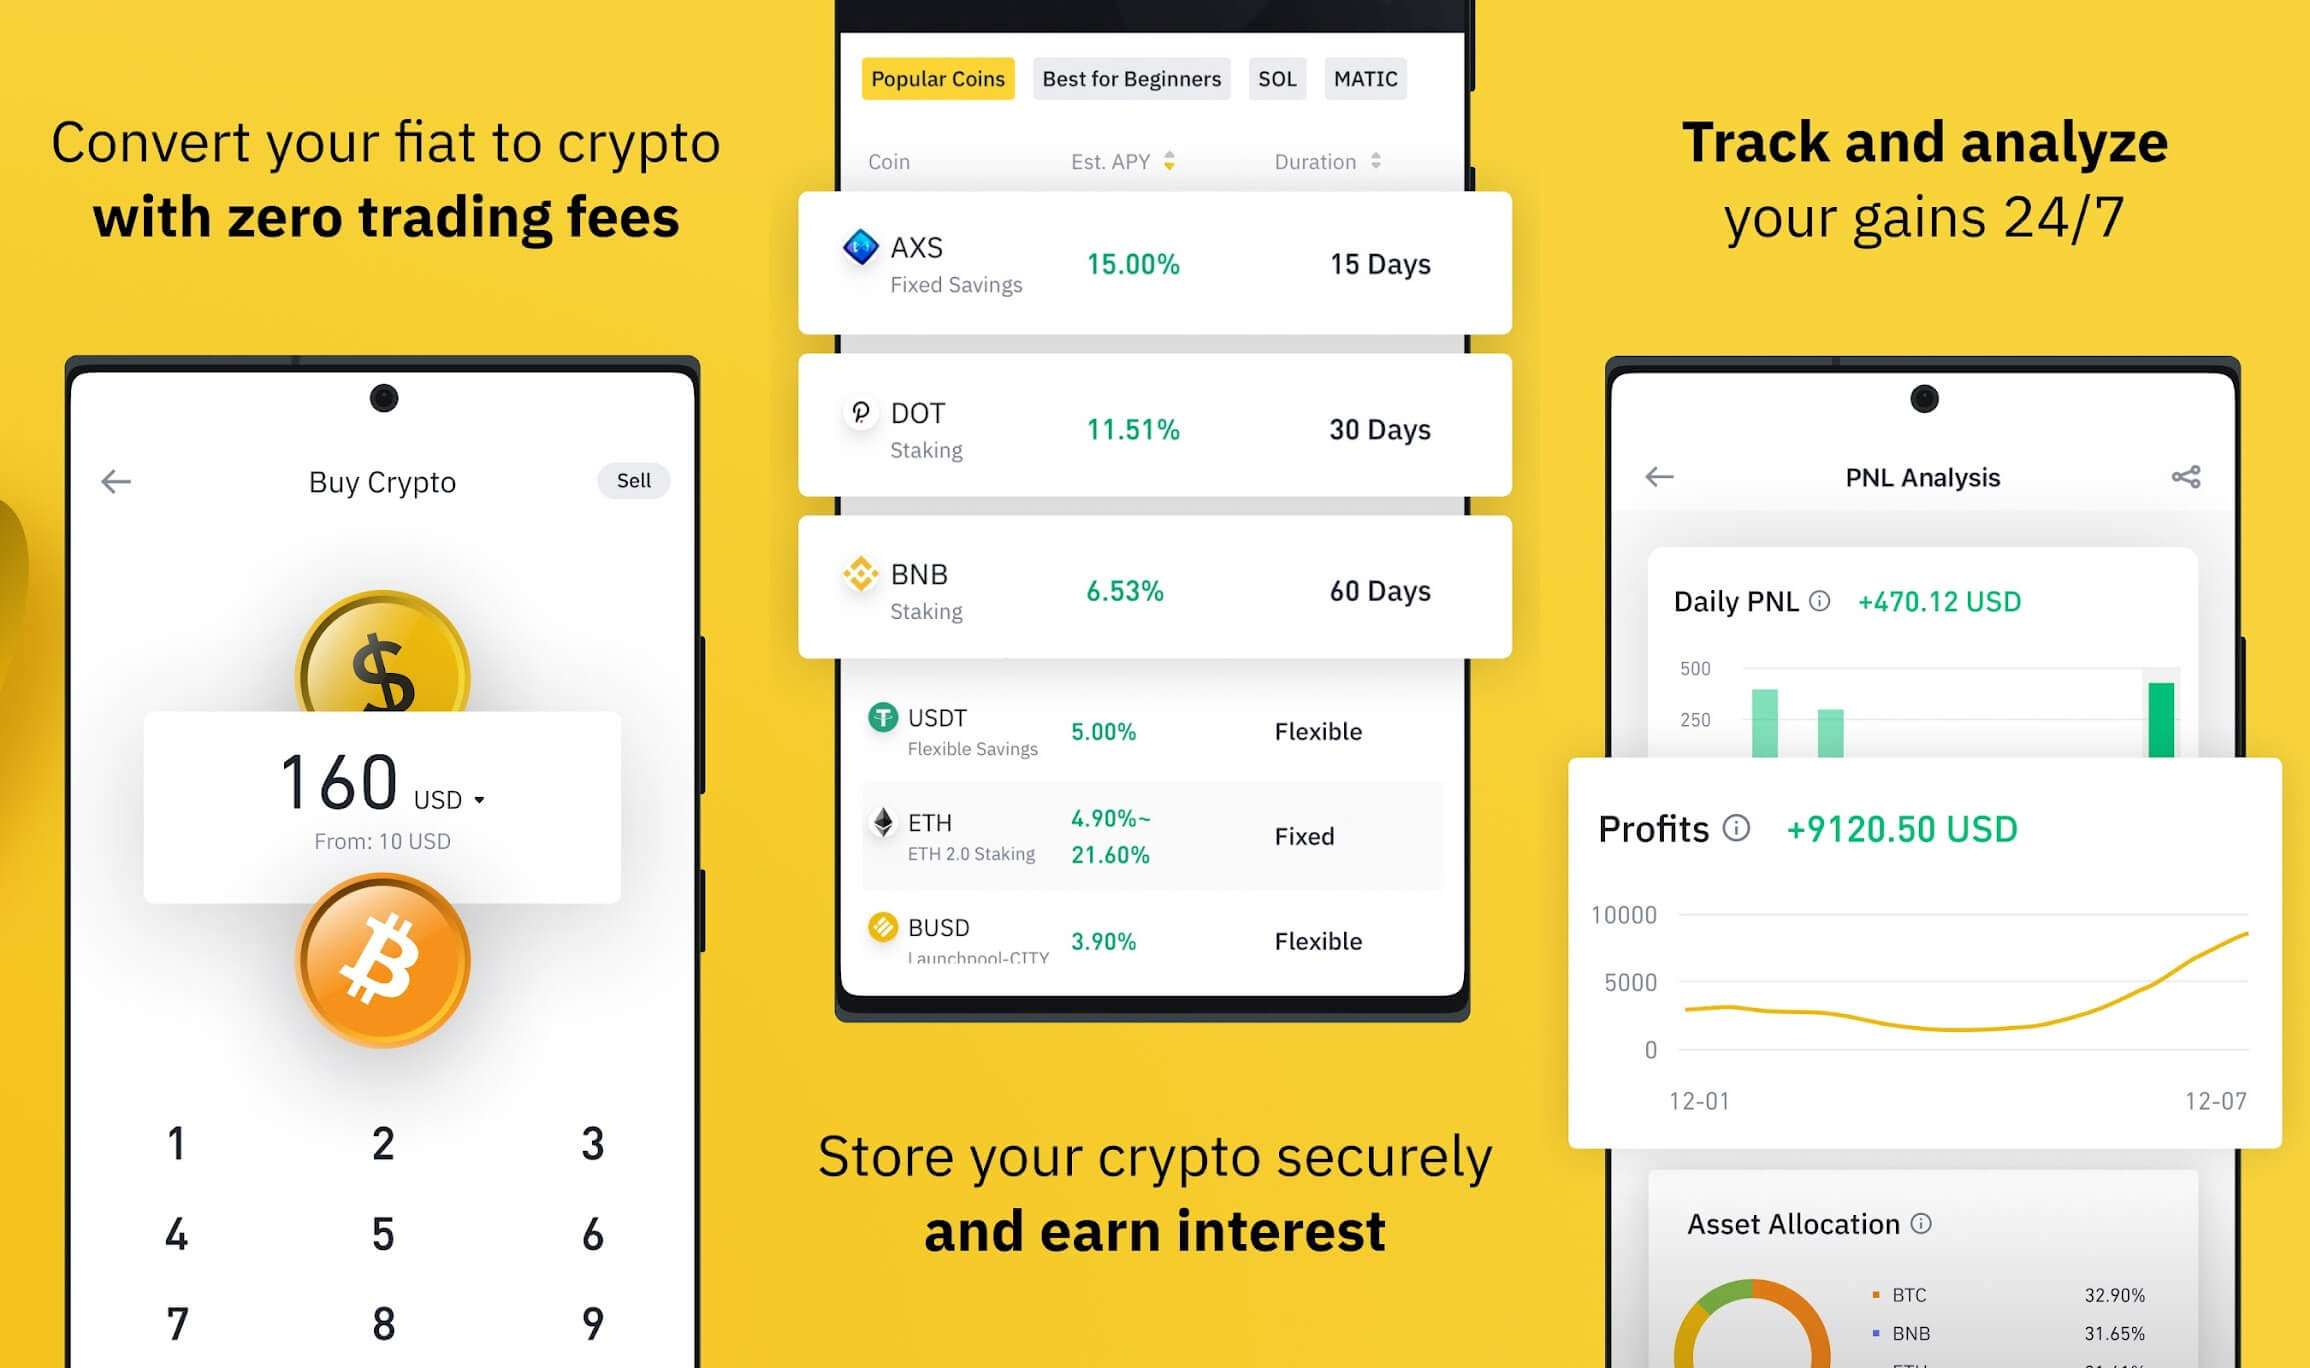 5 Best Cryptocurrency Apps for Beginners - The Economic Times